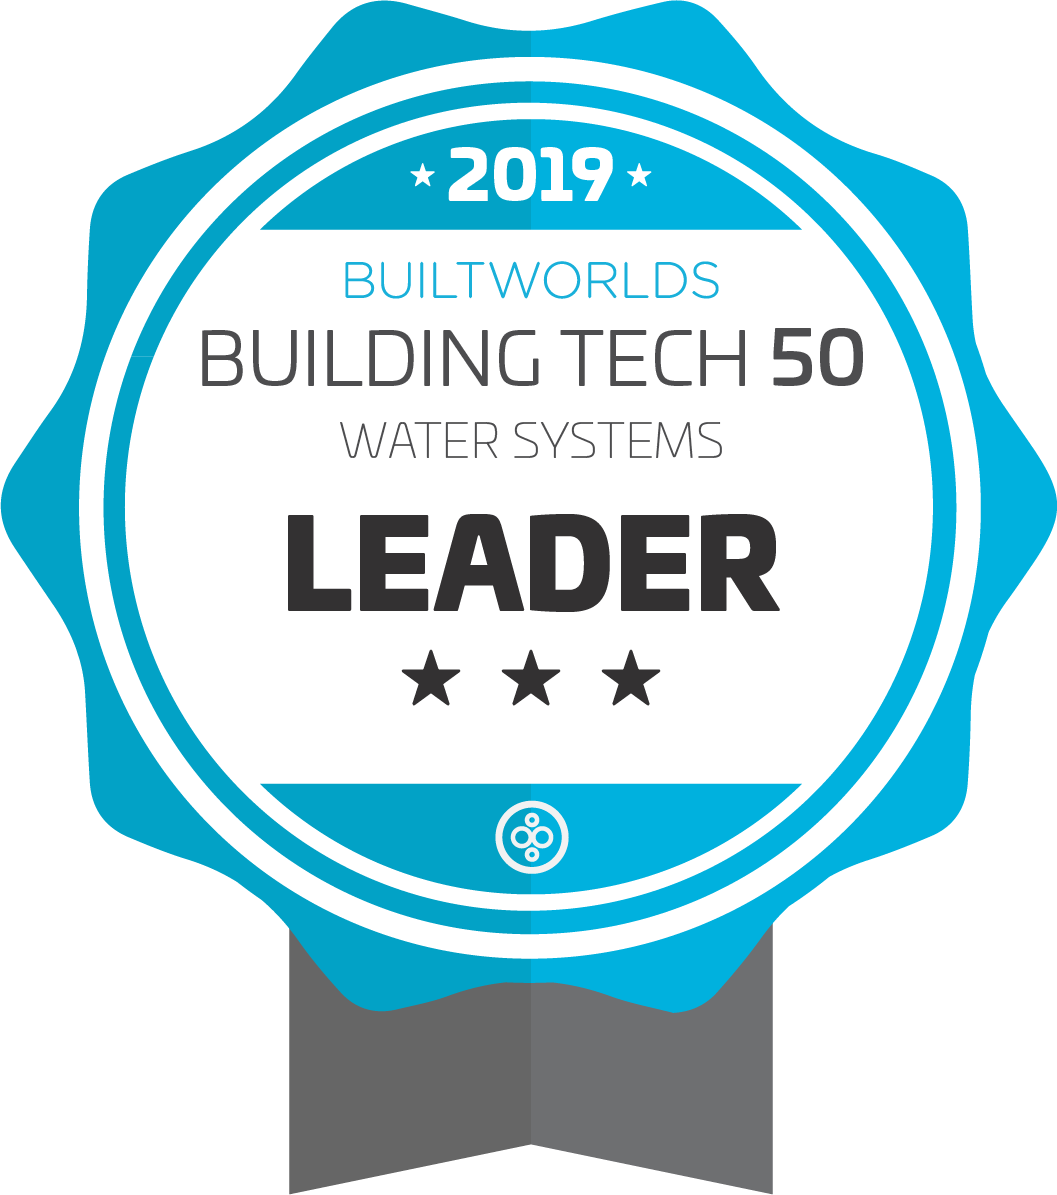 Water Systems LEADER